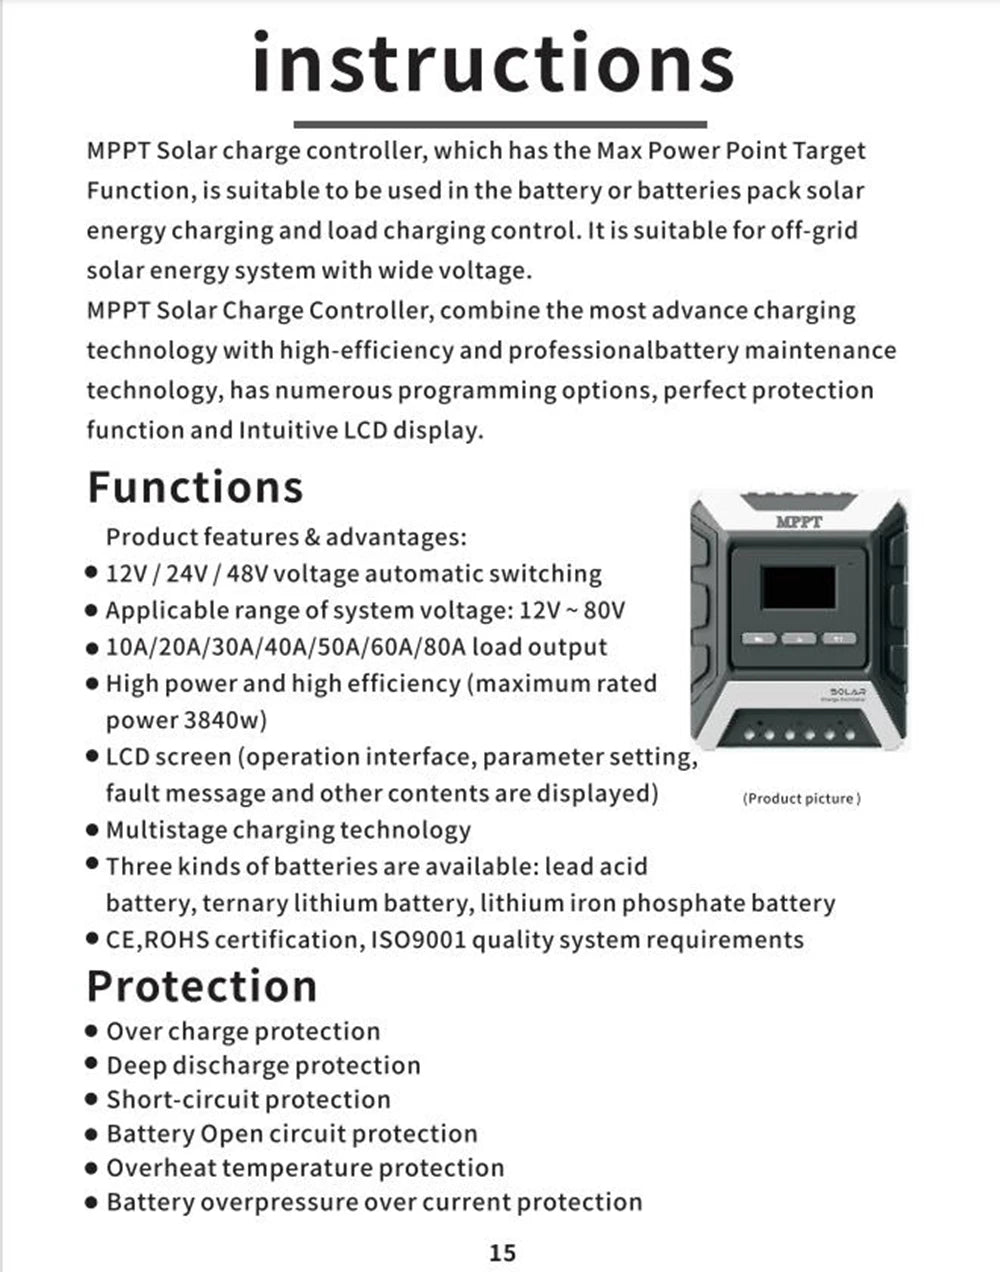 **MPPT Solar Charge Controller**